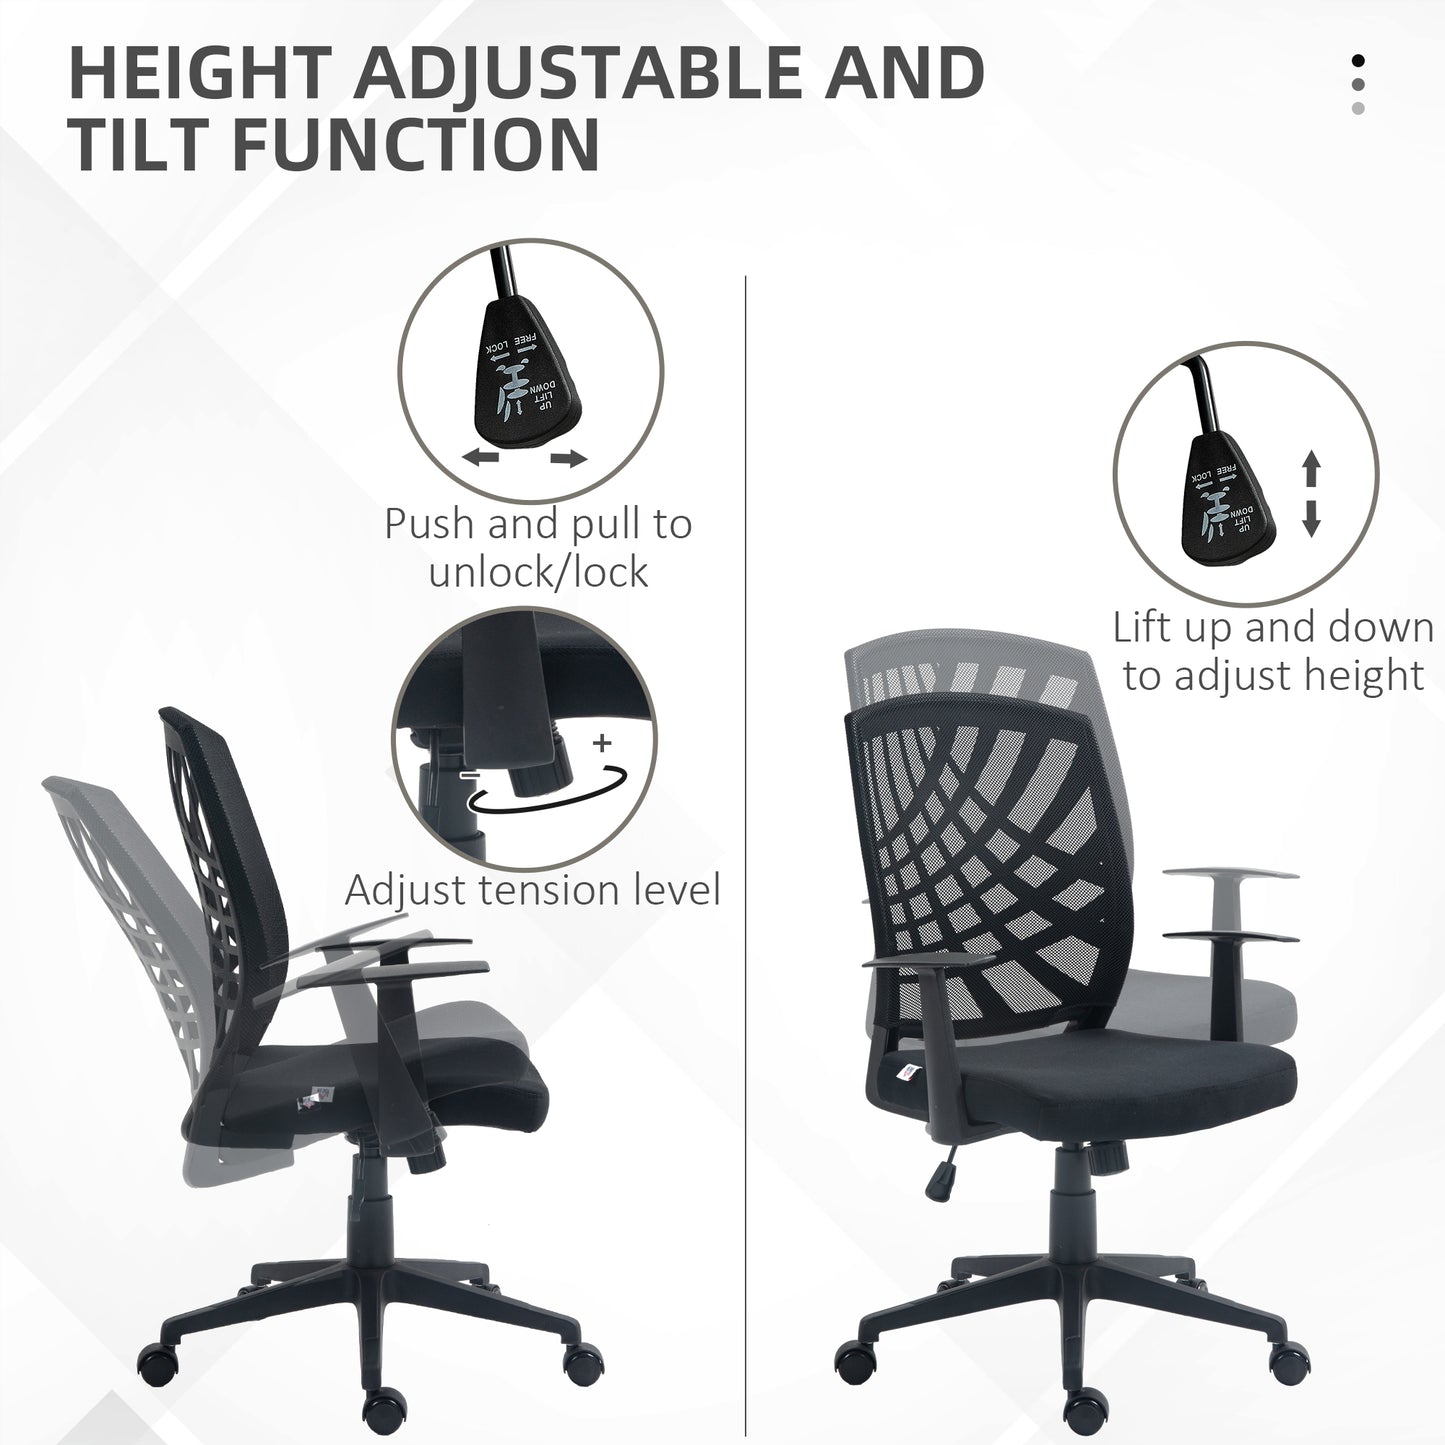 HOMCOM Ergonomic Office Chair Height Adjustable Mesh Chair Desk Chair with Swivel Wheels for Home Office Black